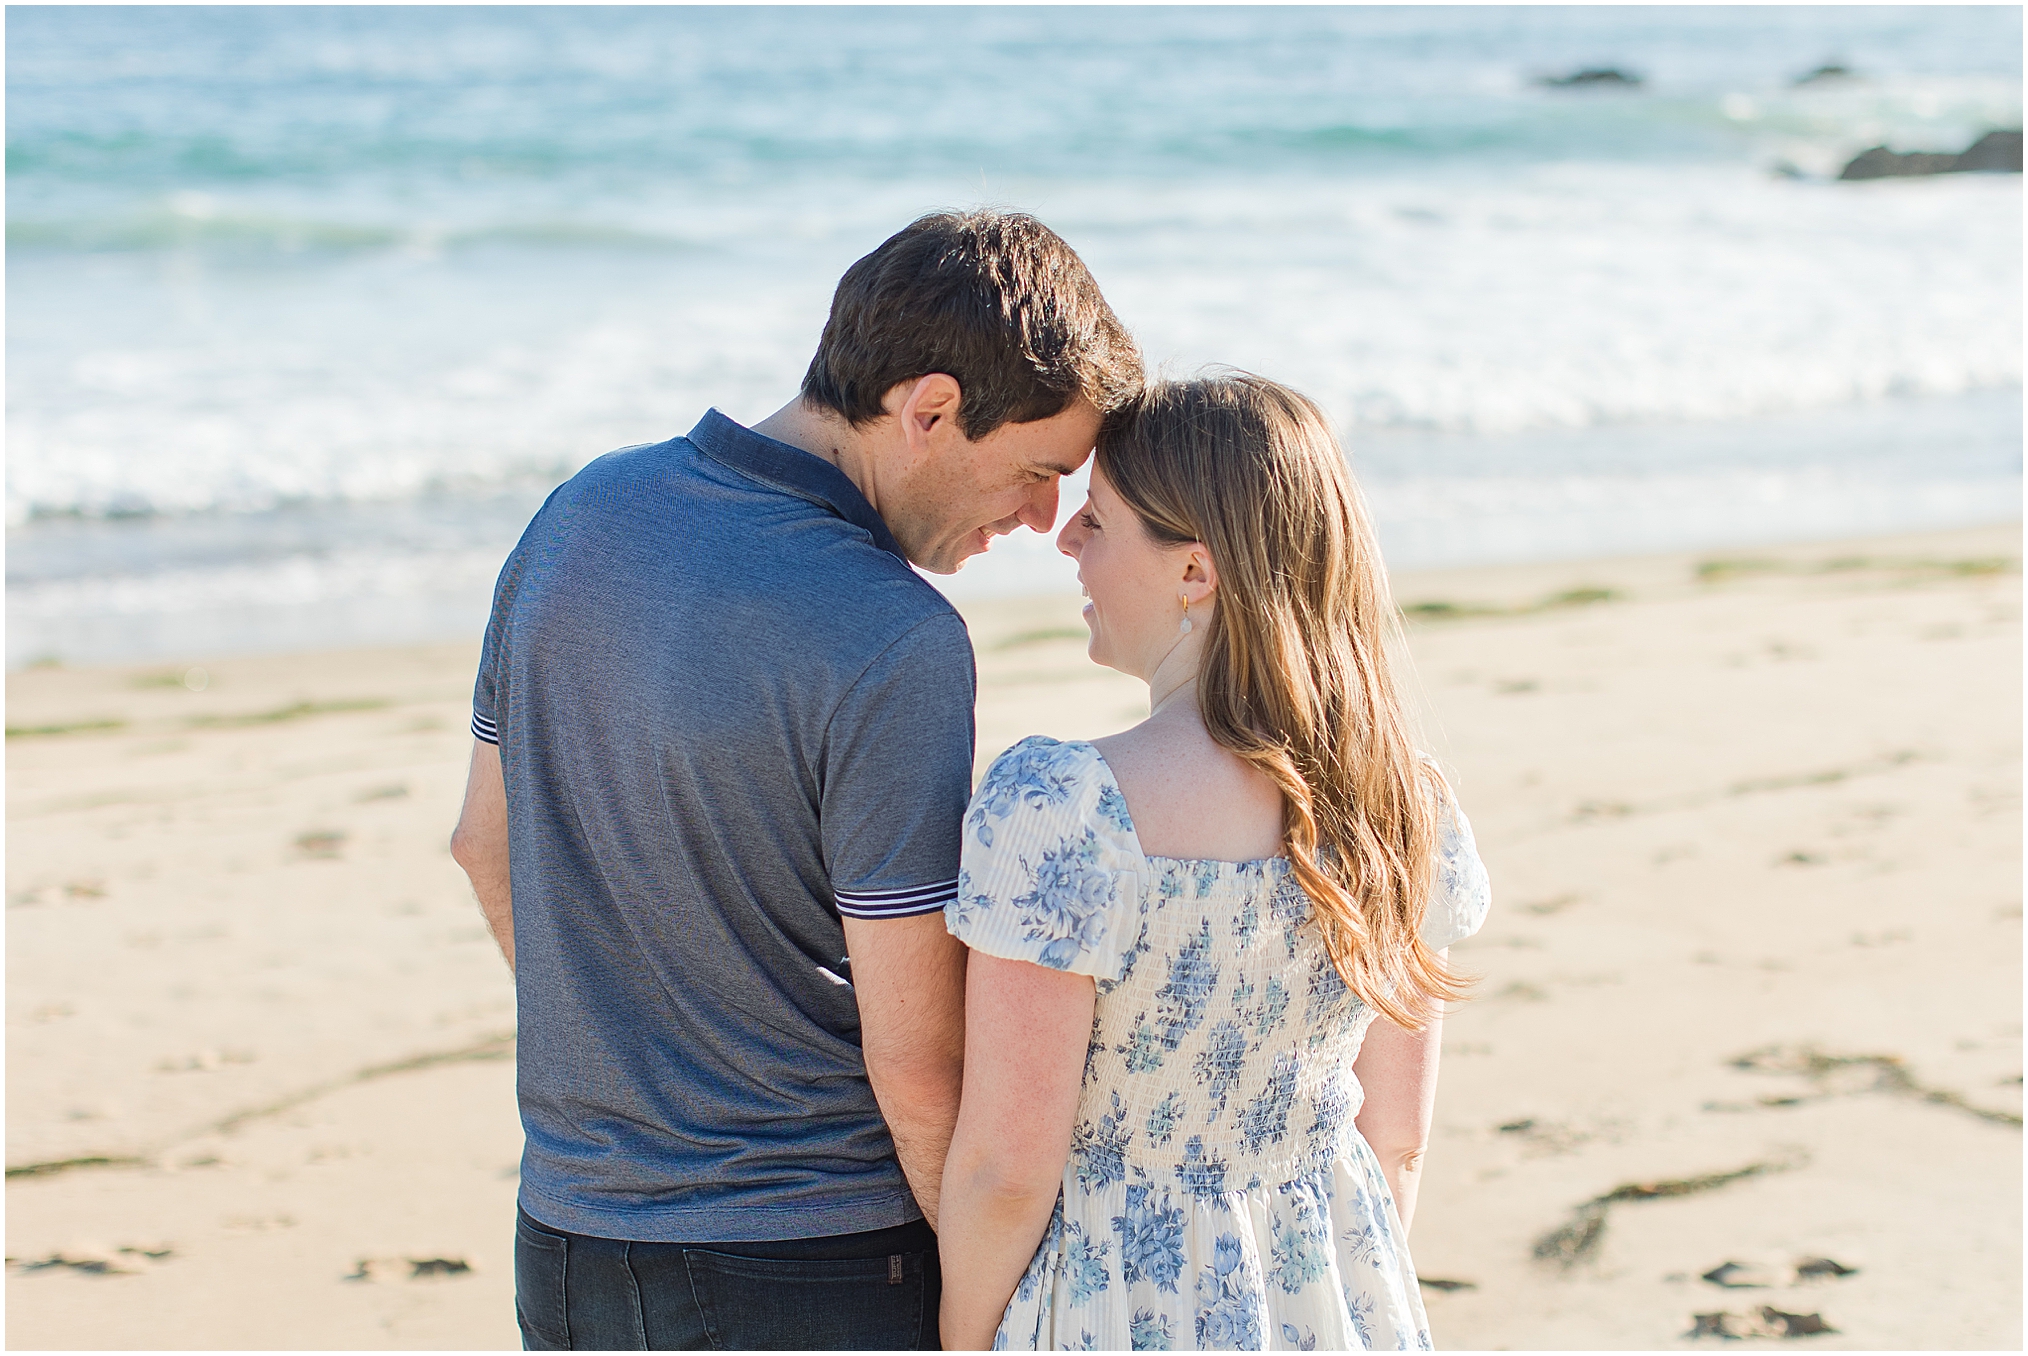 An Irvine Cove Engagement Session in Laguna Beach at golden hour. This lovely couple play on the beach in the golden sunset.